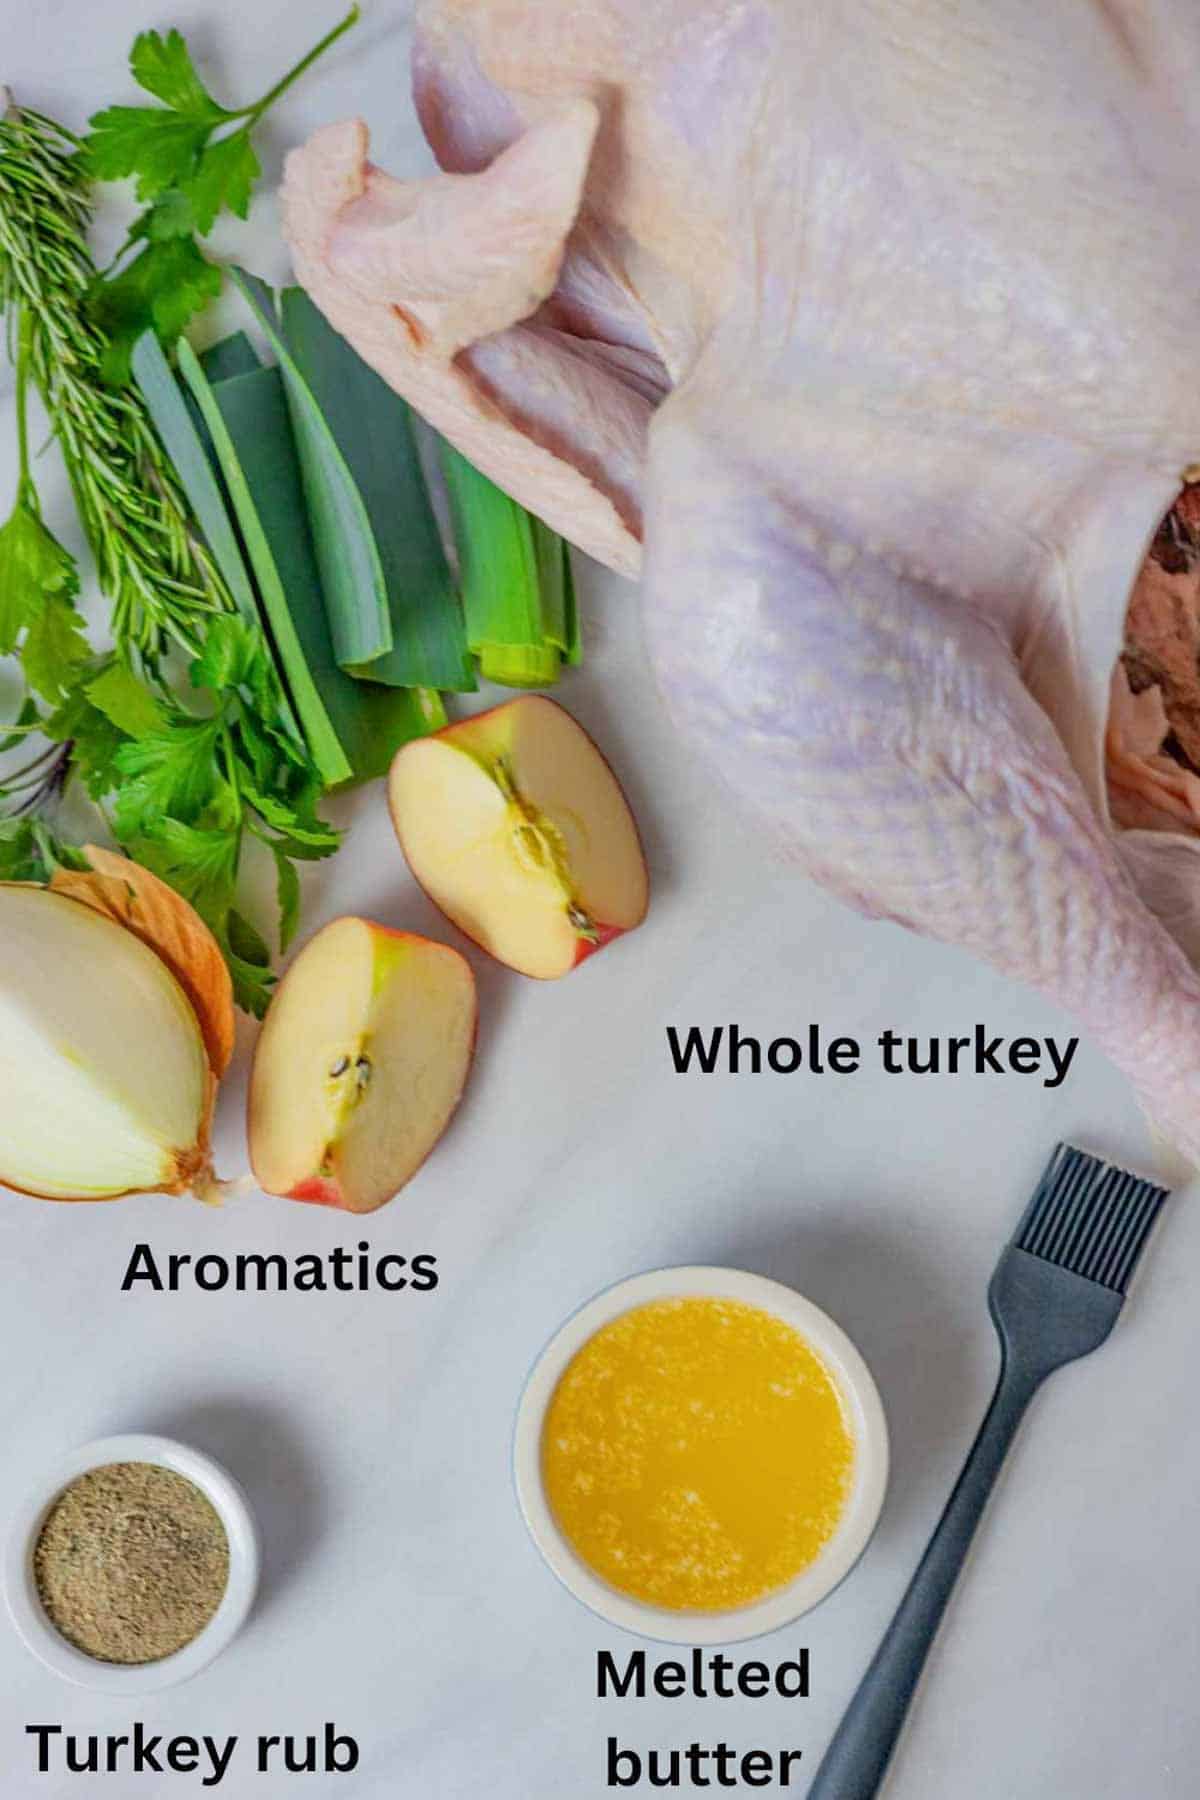 Ingredients for roasted turkey on a marble board with black text labels.